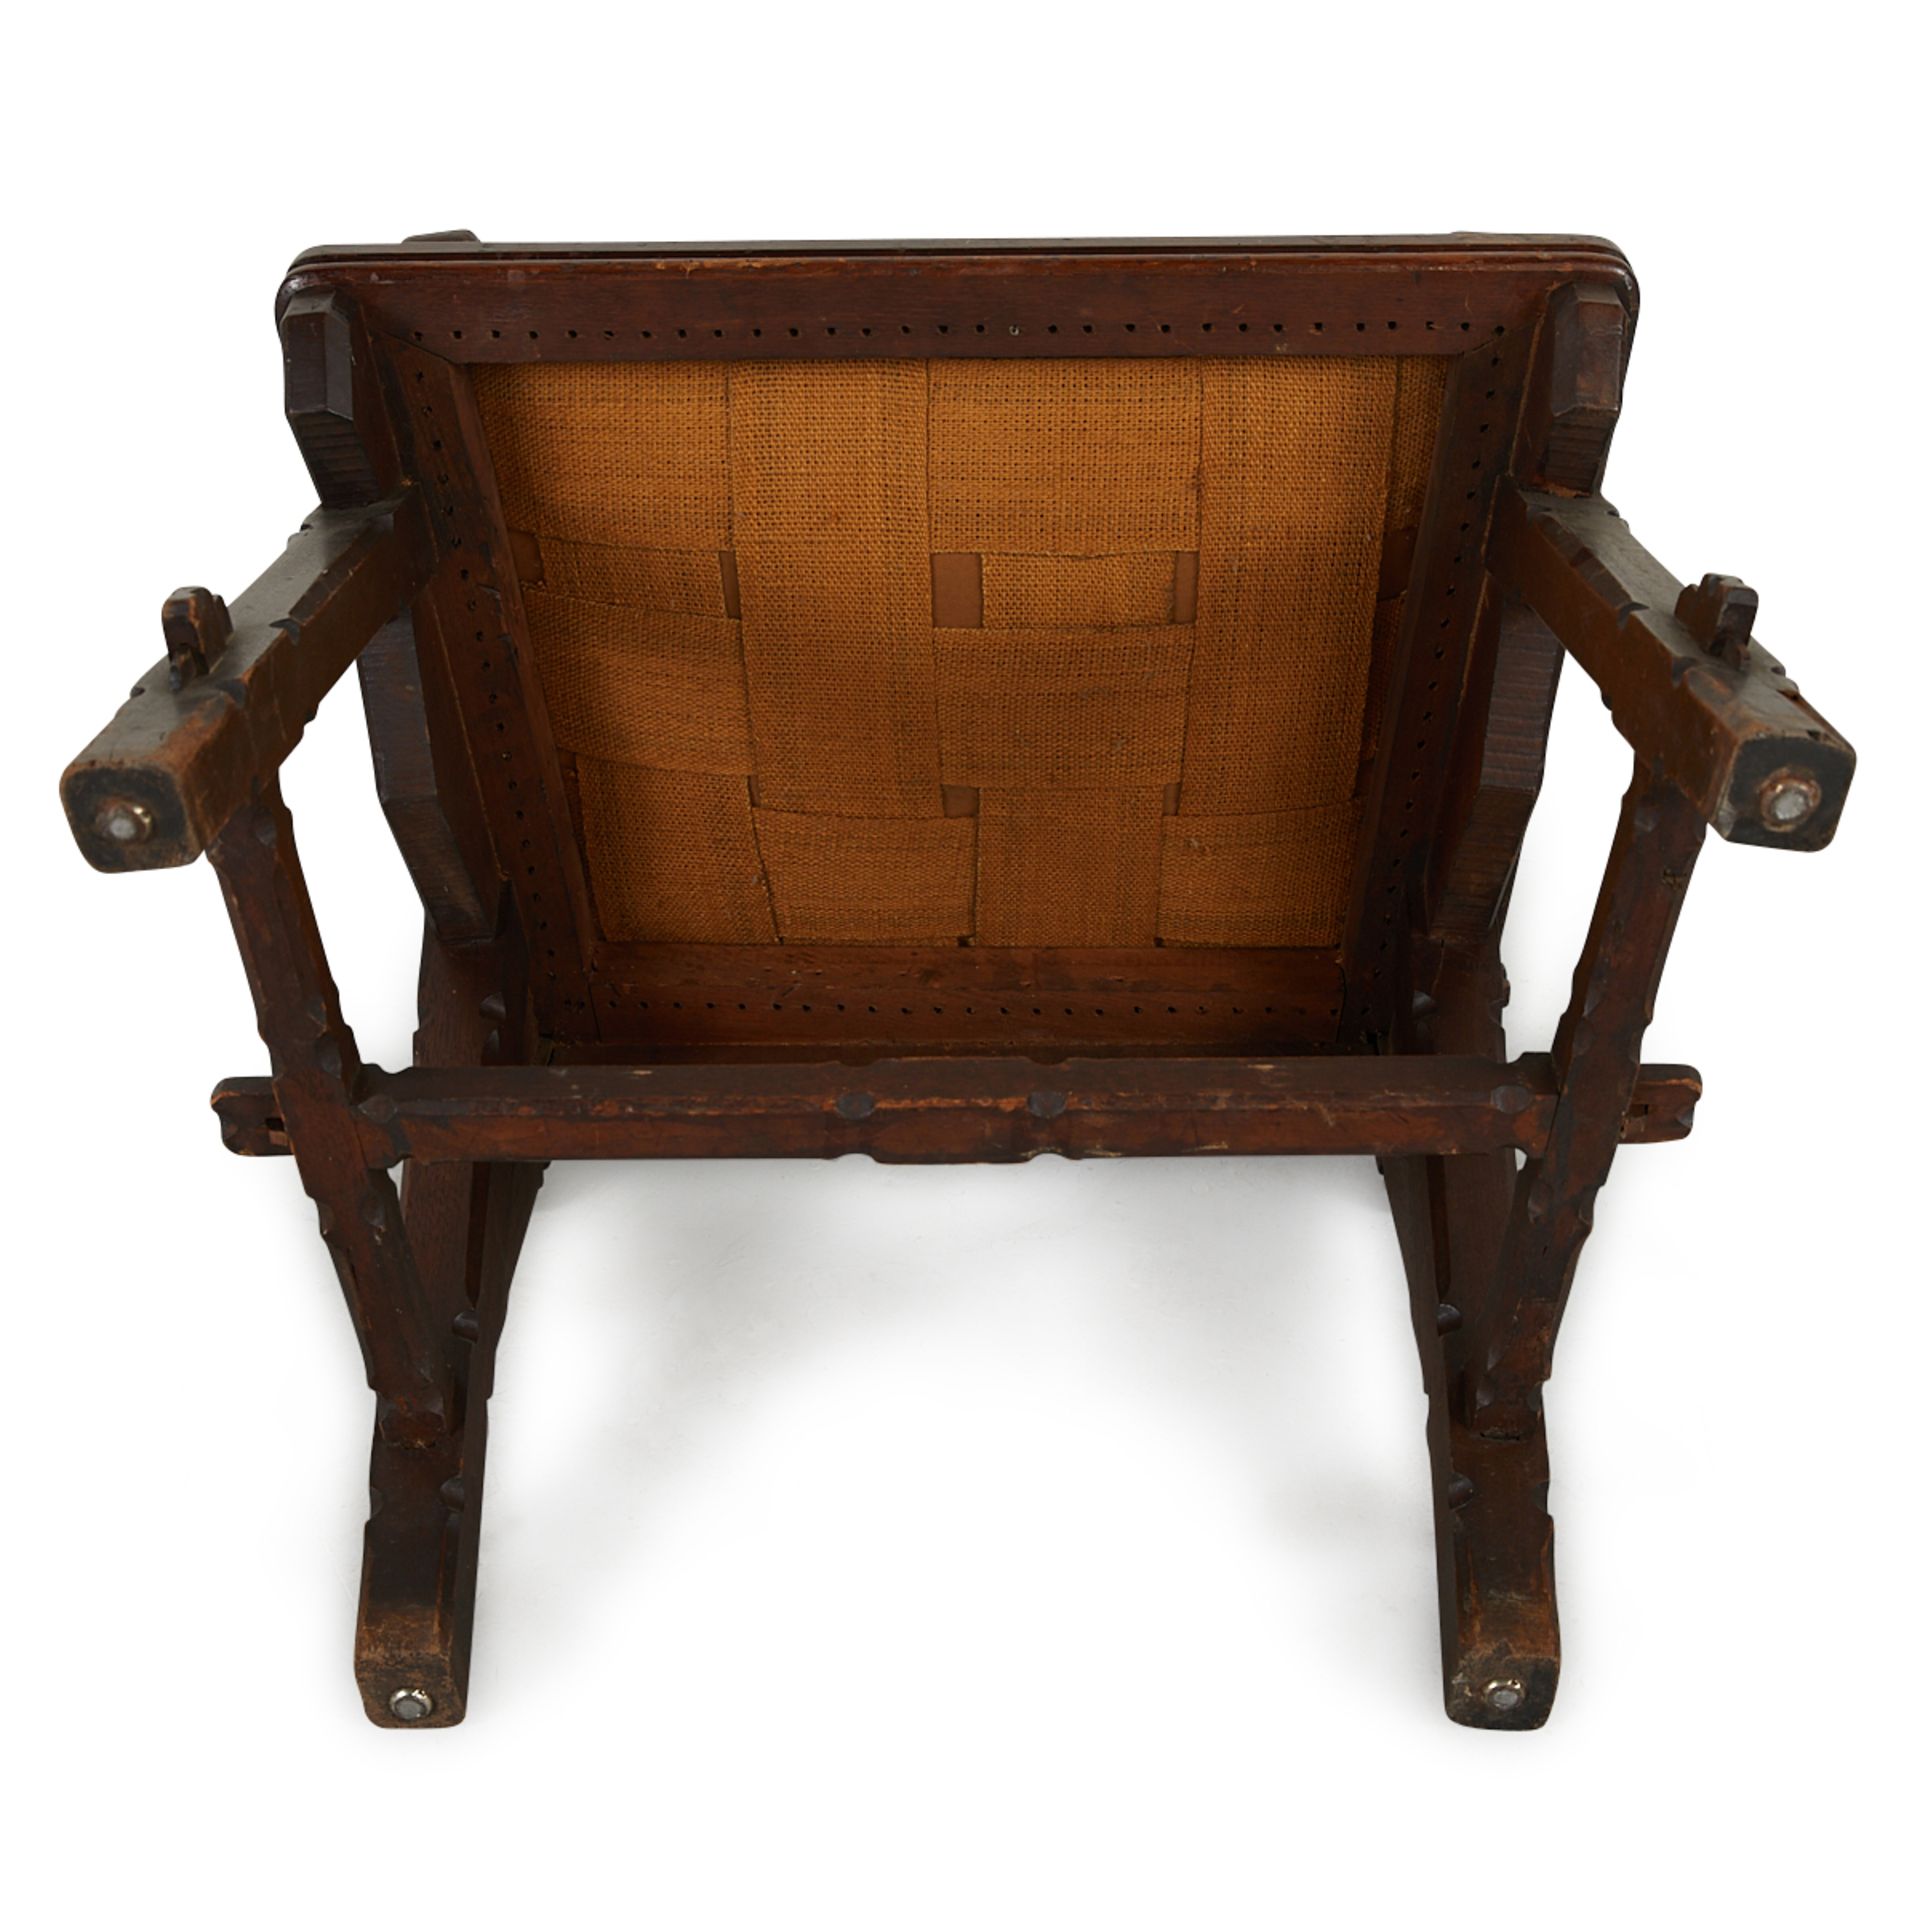 Aesthetic Movement Gothic Walnut Chair ca. 1875 - Image 11 of 11